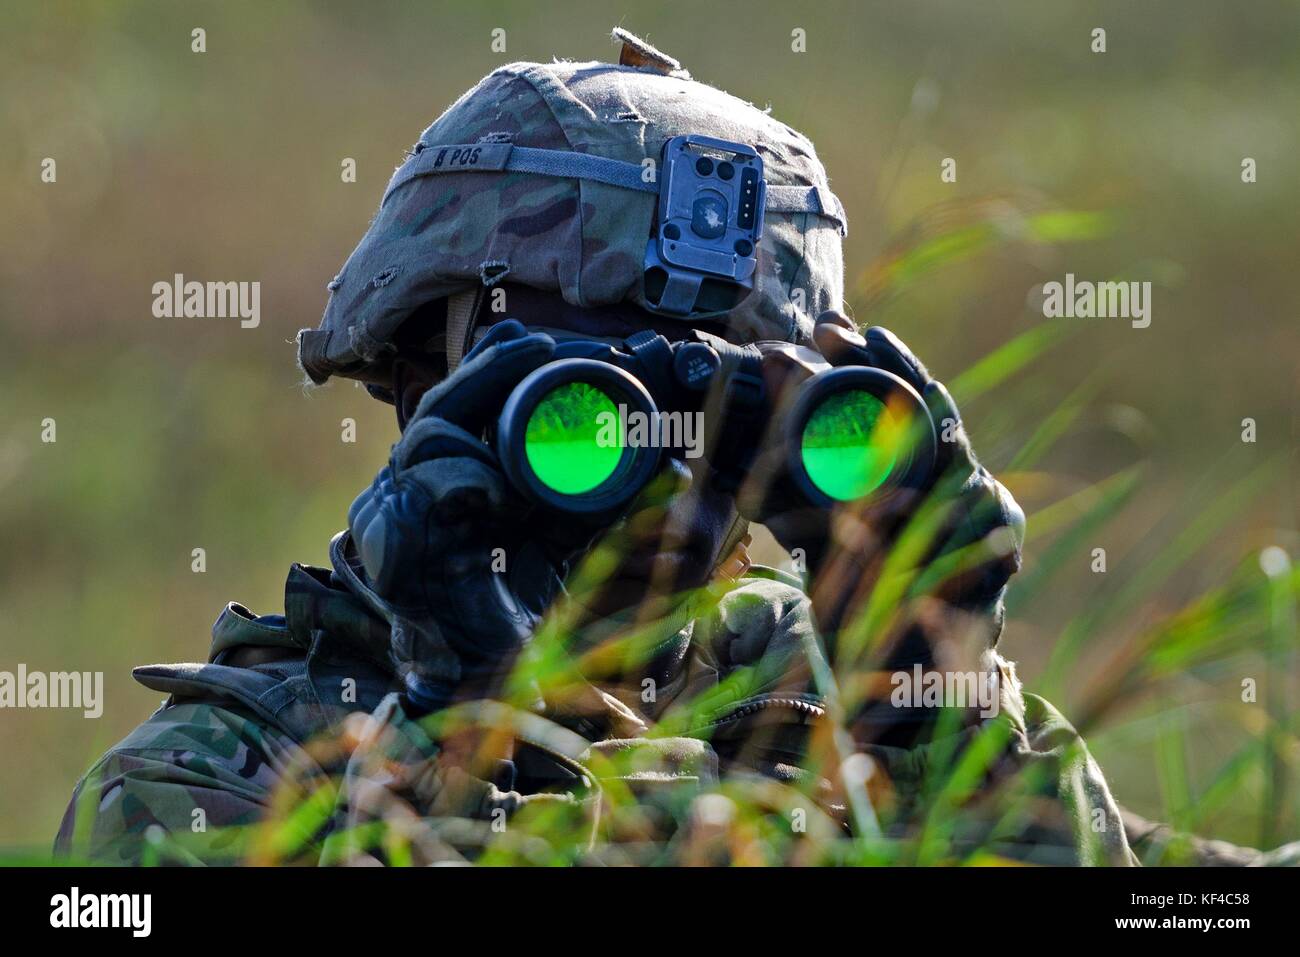 A U.S. Army soldier scans the horizon with binoculars during exercise Dragon at the Bemowo Piskie Training Area September 26, 2017 near Orzysz, Poland. Stock Photo